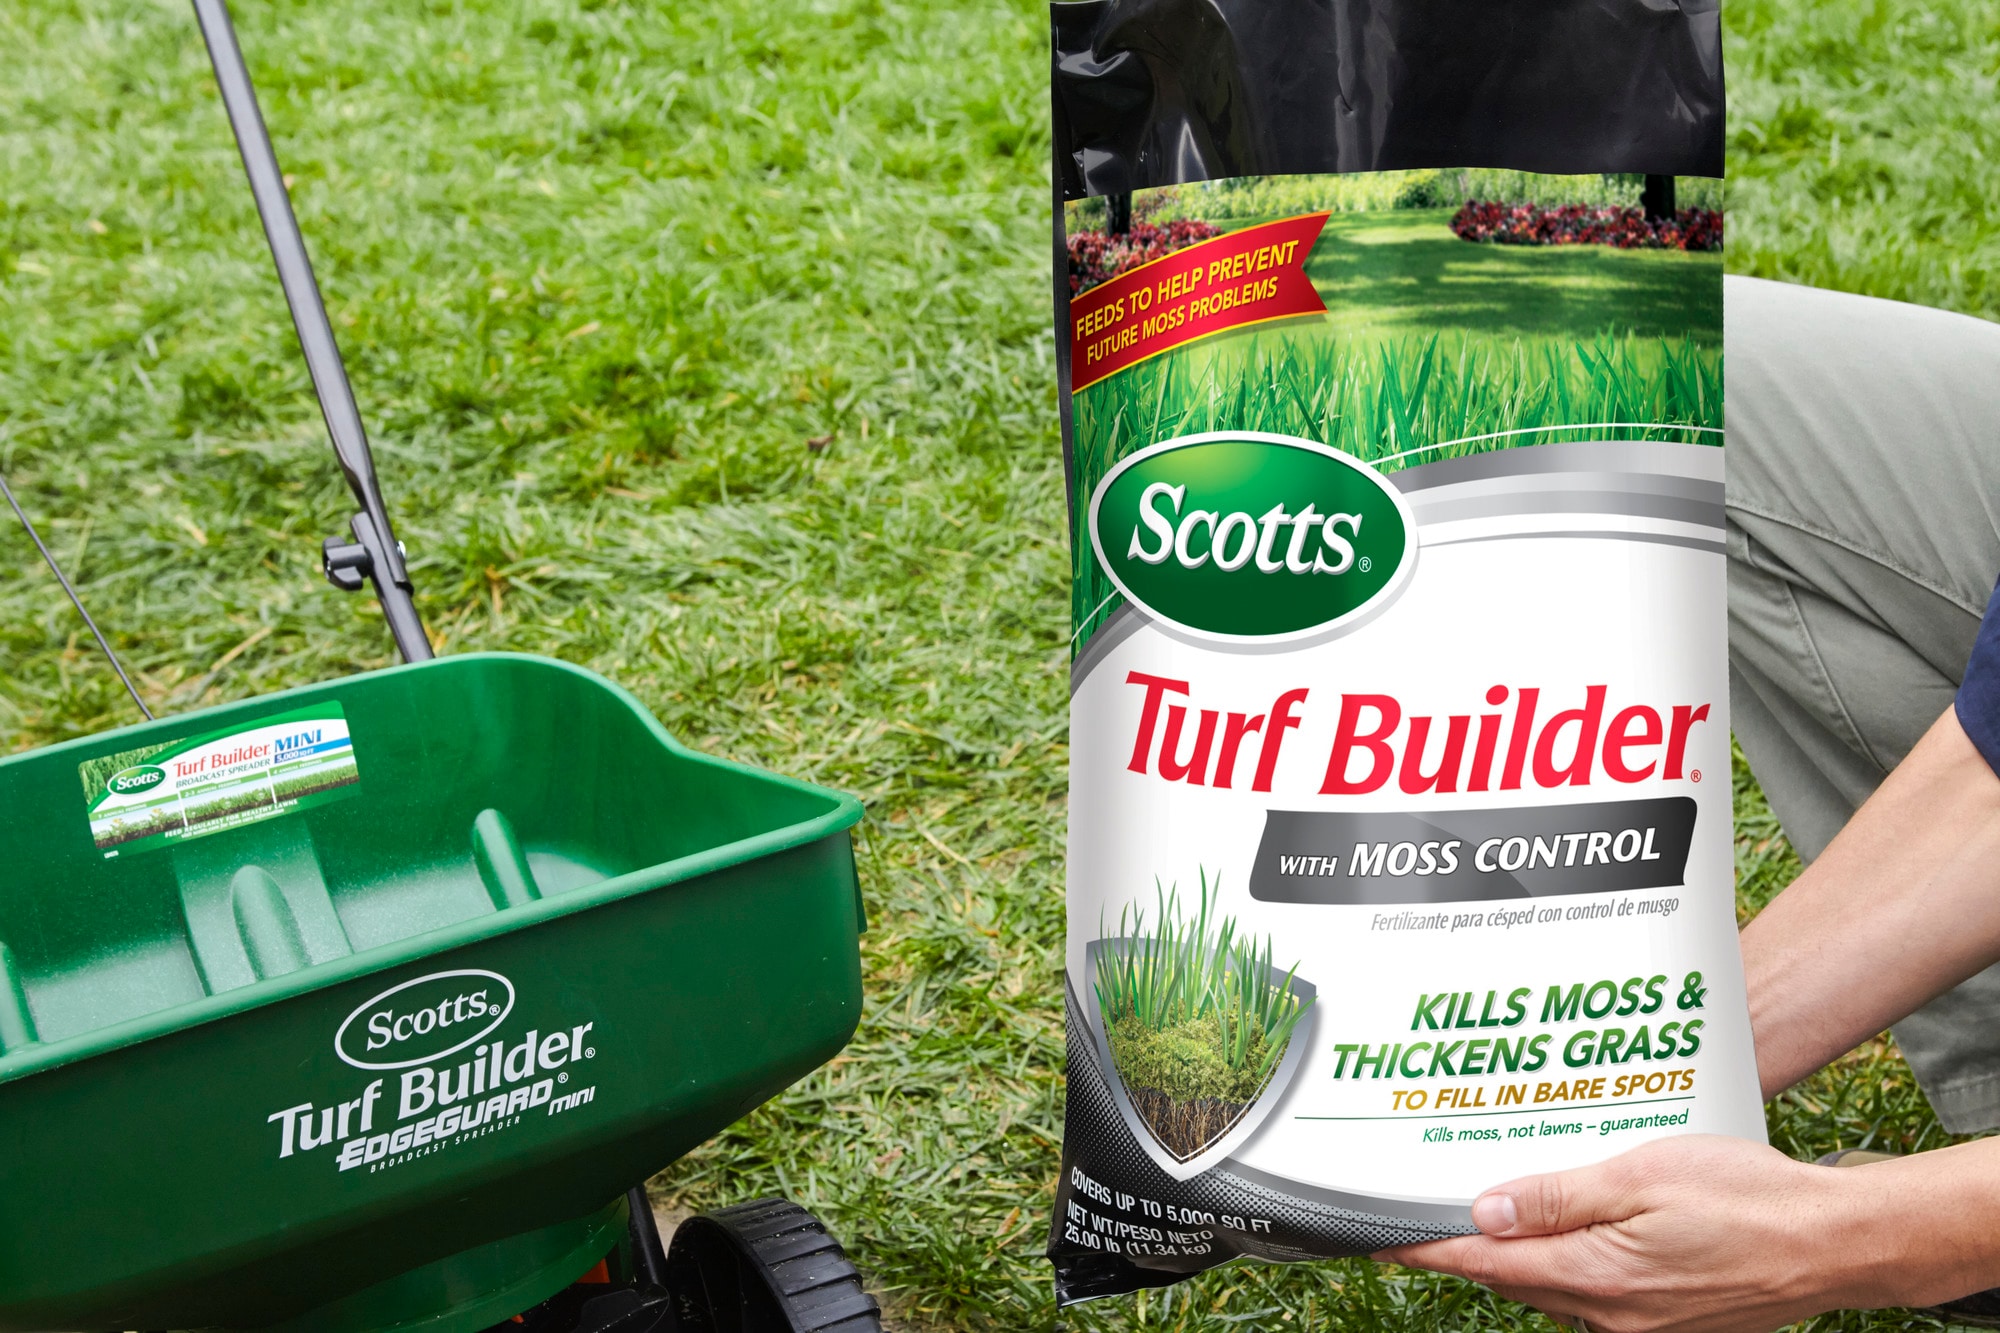 How to Keep Field Mice Out of Your Lawn – The Turfgrass Group Inc